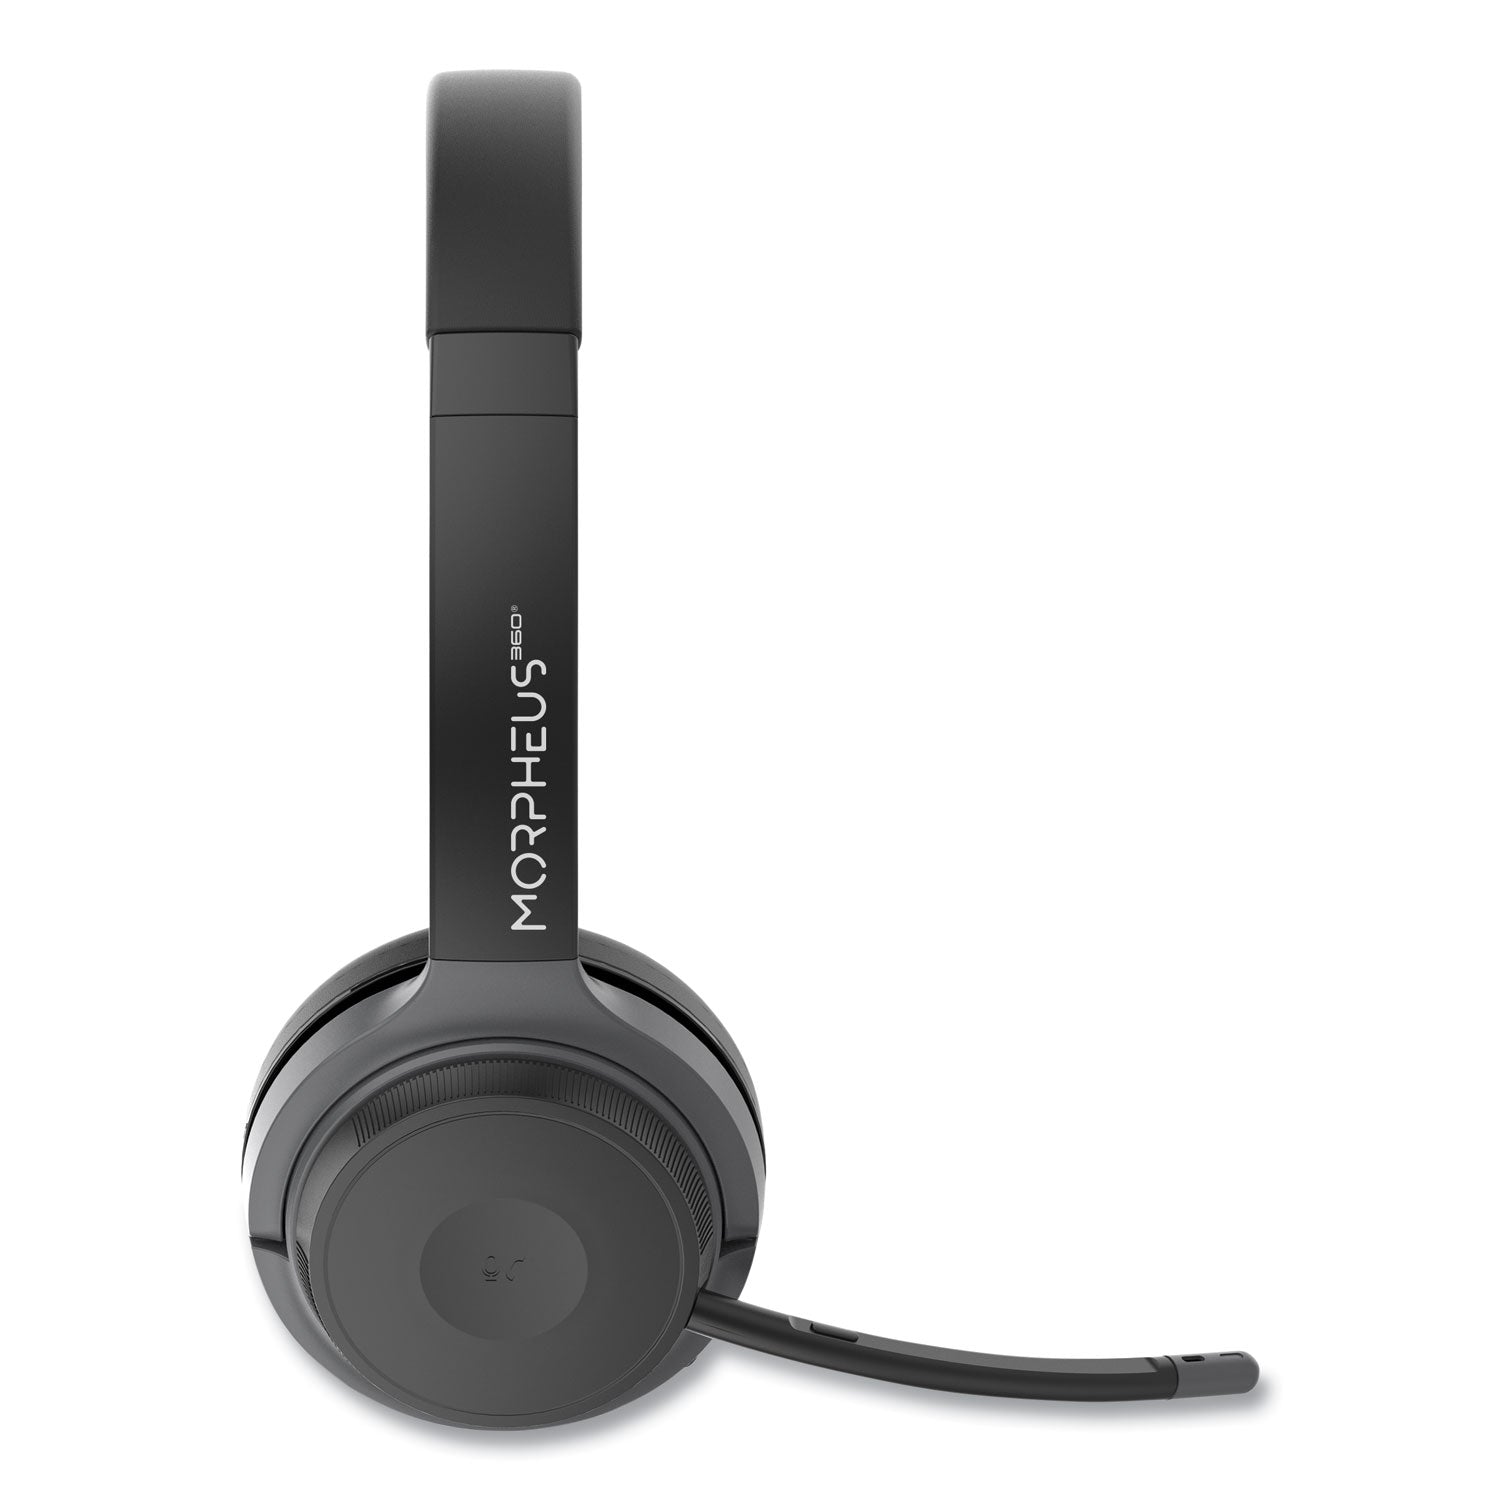 hs6500sbt-advantage-wireless-stereo-headset-with-detachable-boom-microphone_mhshs6500sbt - 2